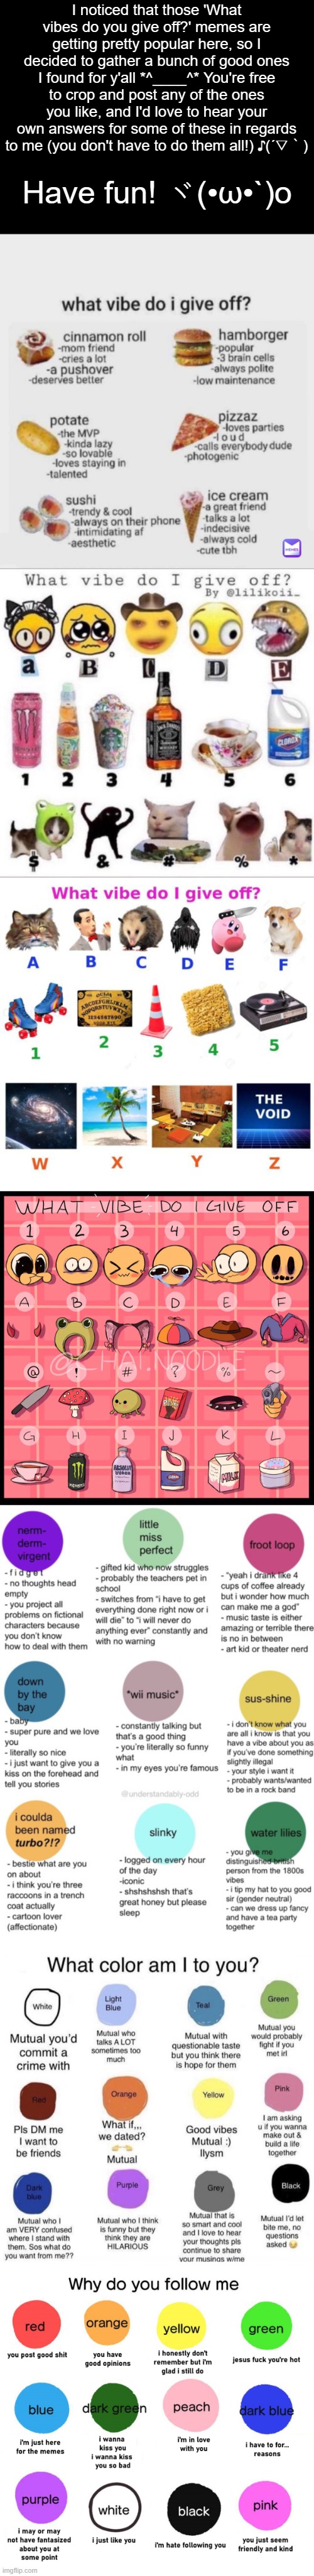 Feel free to use whichever ones you'd like! | I noticed that those 'What vibes do you give off?' memes are getting pretty popular here, so I decided to gather a bunch of good ones I found for y'all *^____^* You're free to crop and post any of the ones you like, and I'd love to hear your own answers for some of these in regards to me (you don't have to do them all!) ♪(´▽｀); Have fun! ヾ(•ω•`)o | image tagged in memes,good vibes,vibes,vibe,vibe check | made w/ Imgflip meme maker